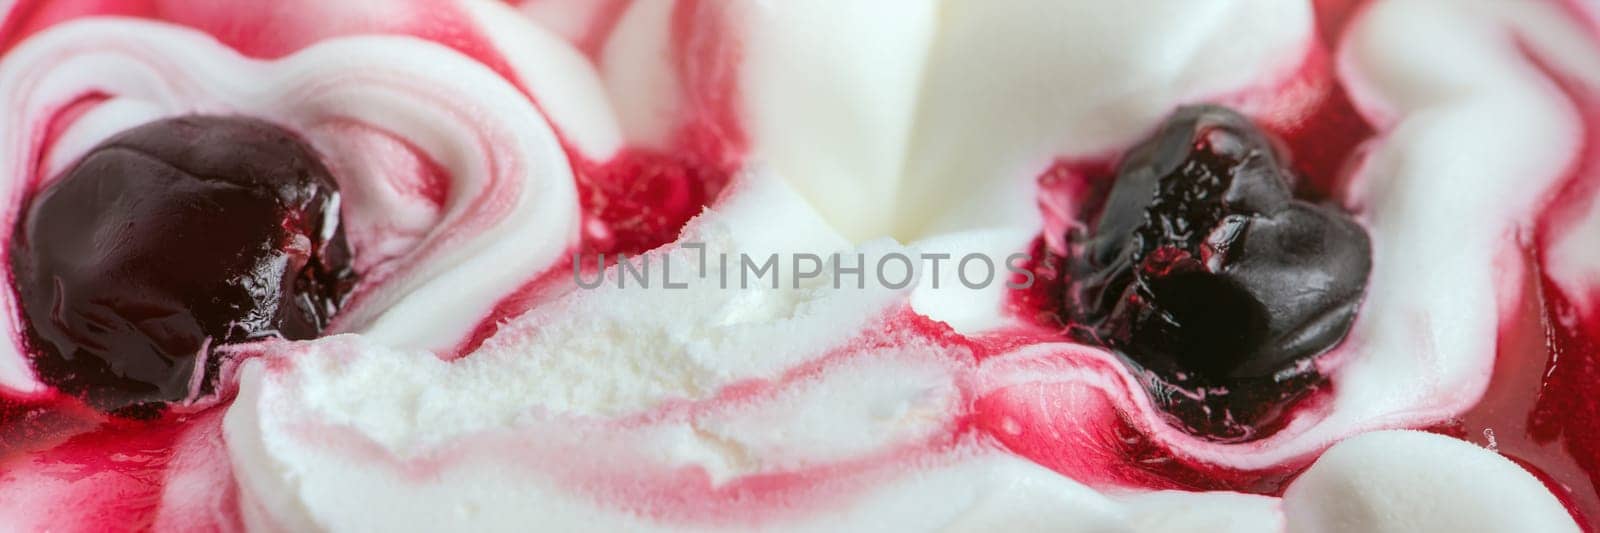 Texture of cherry ice cream. Fresh and delicious ice cream with cherries is a tasty treat for children and adults. High quality photo